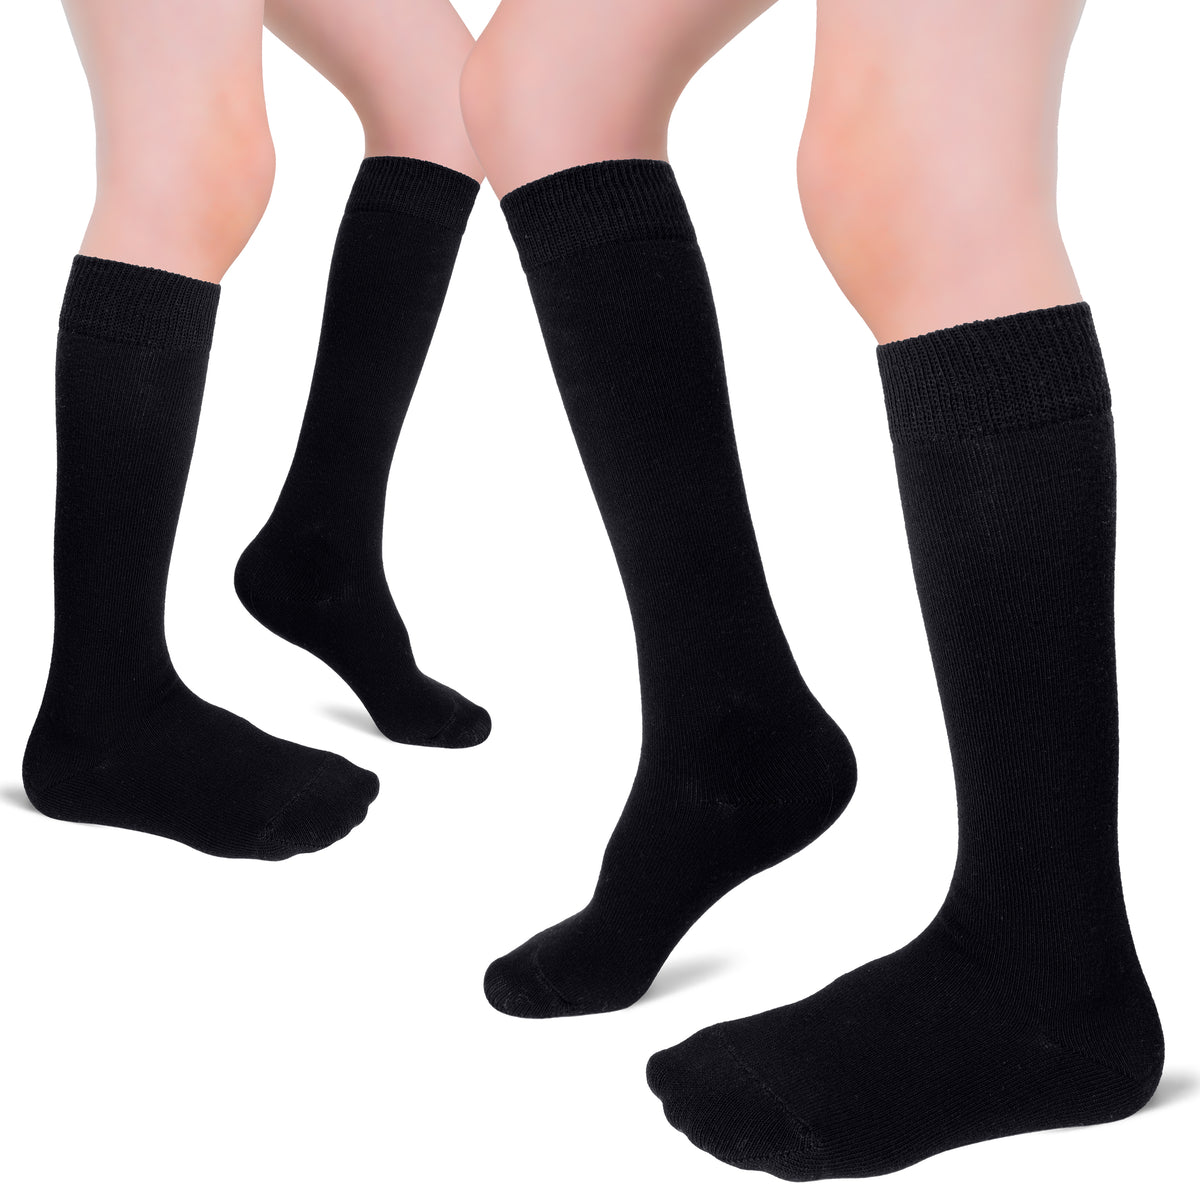 This image depicts a pair of kids' cotton knee-high socks. The socks are made of soft, breathable cotton and come in a variety of colors.